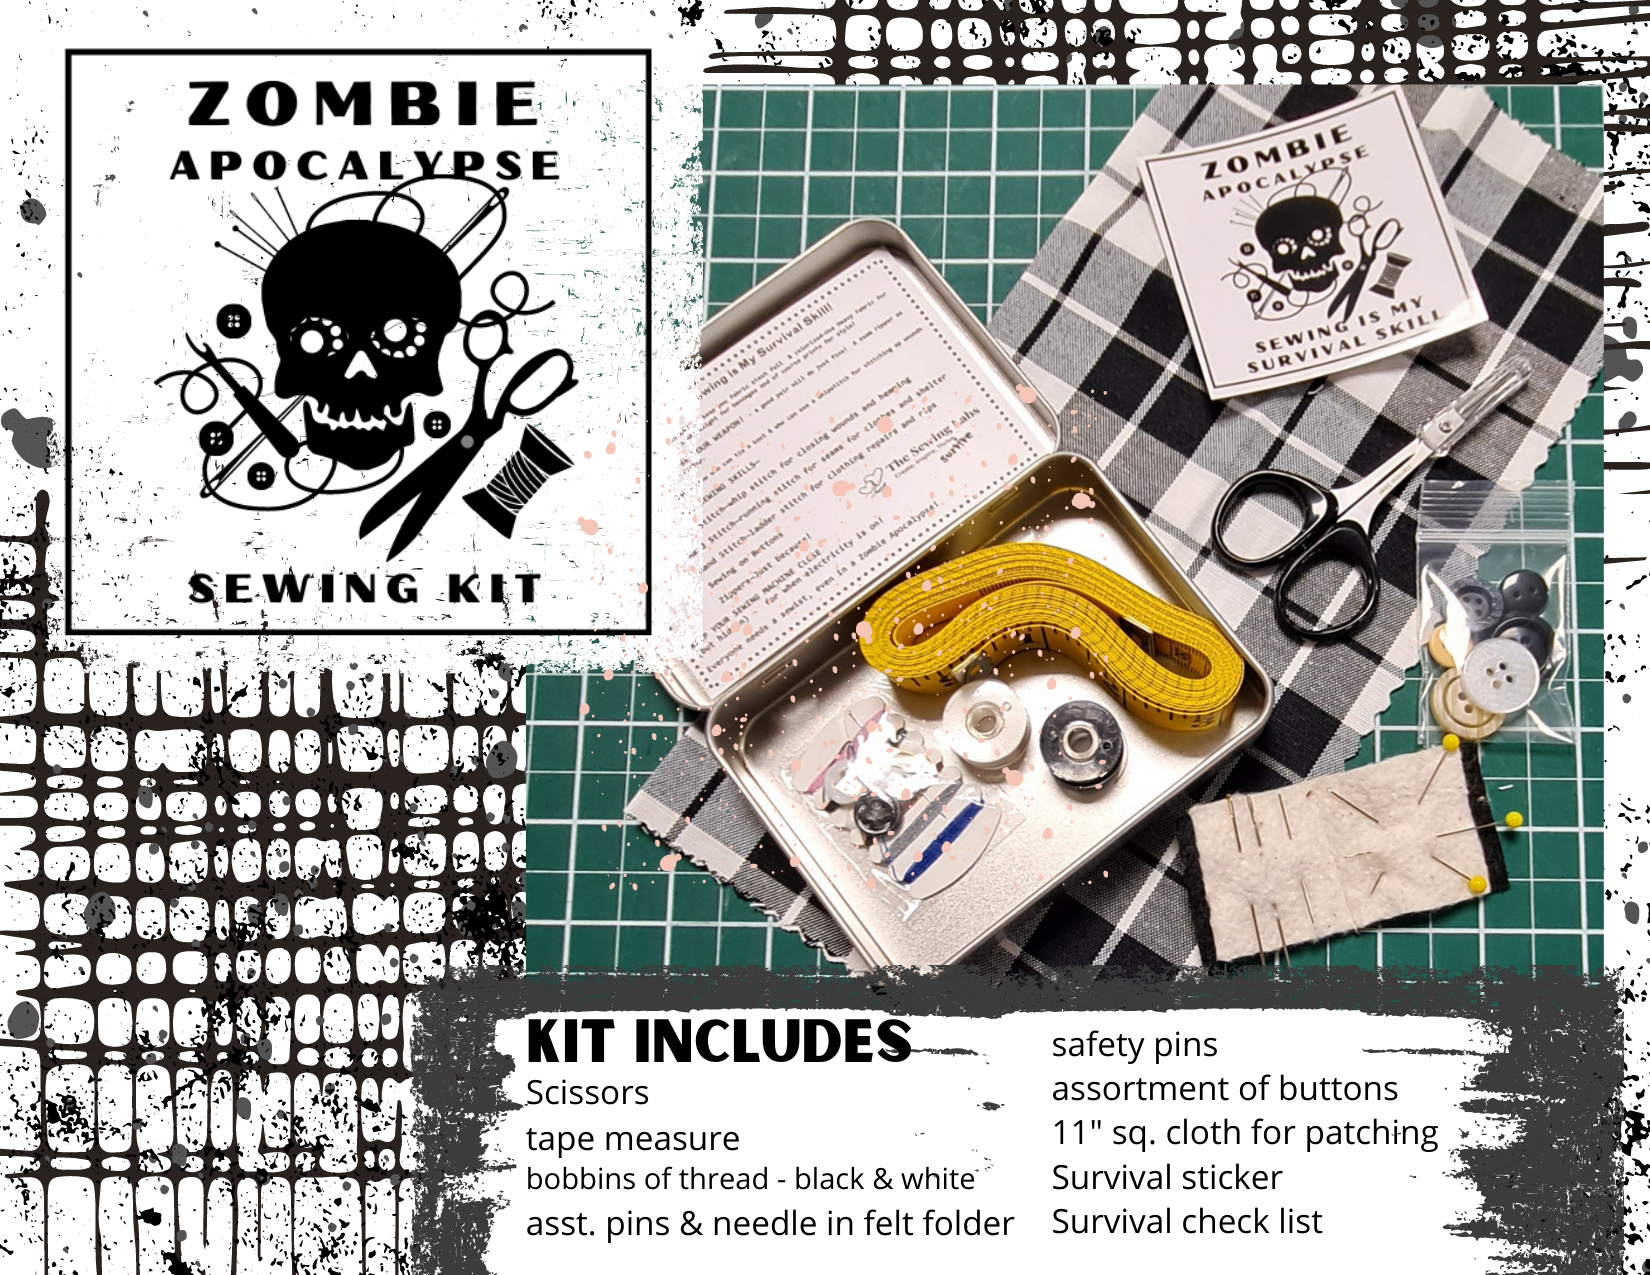 Zombie Apocalypse Sewing Kit @ The Sewing Labs